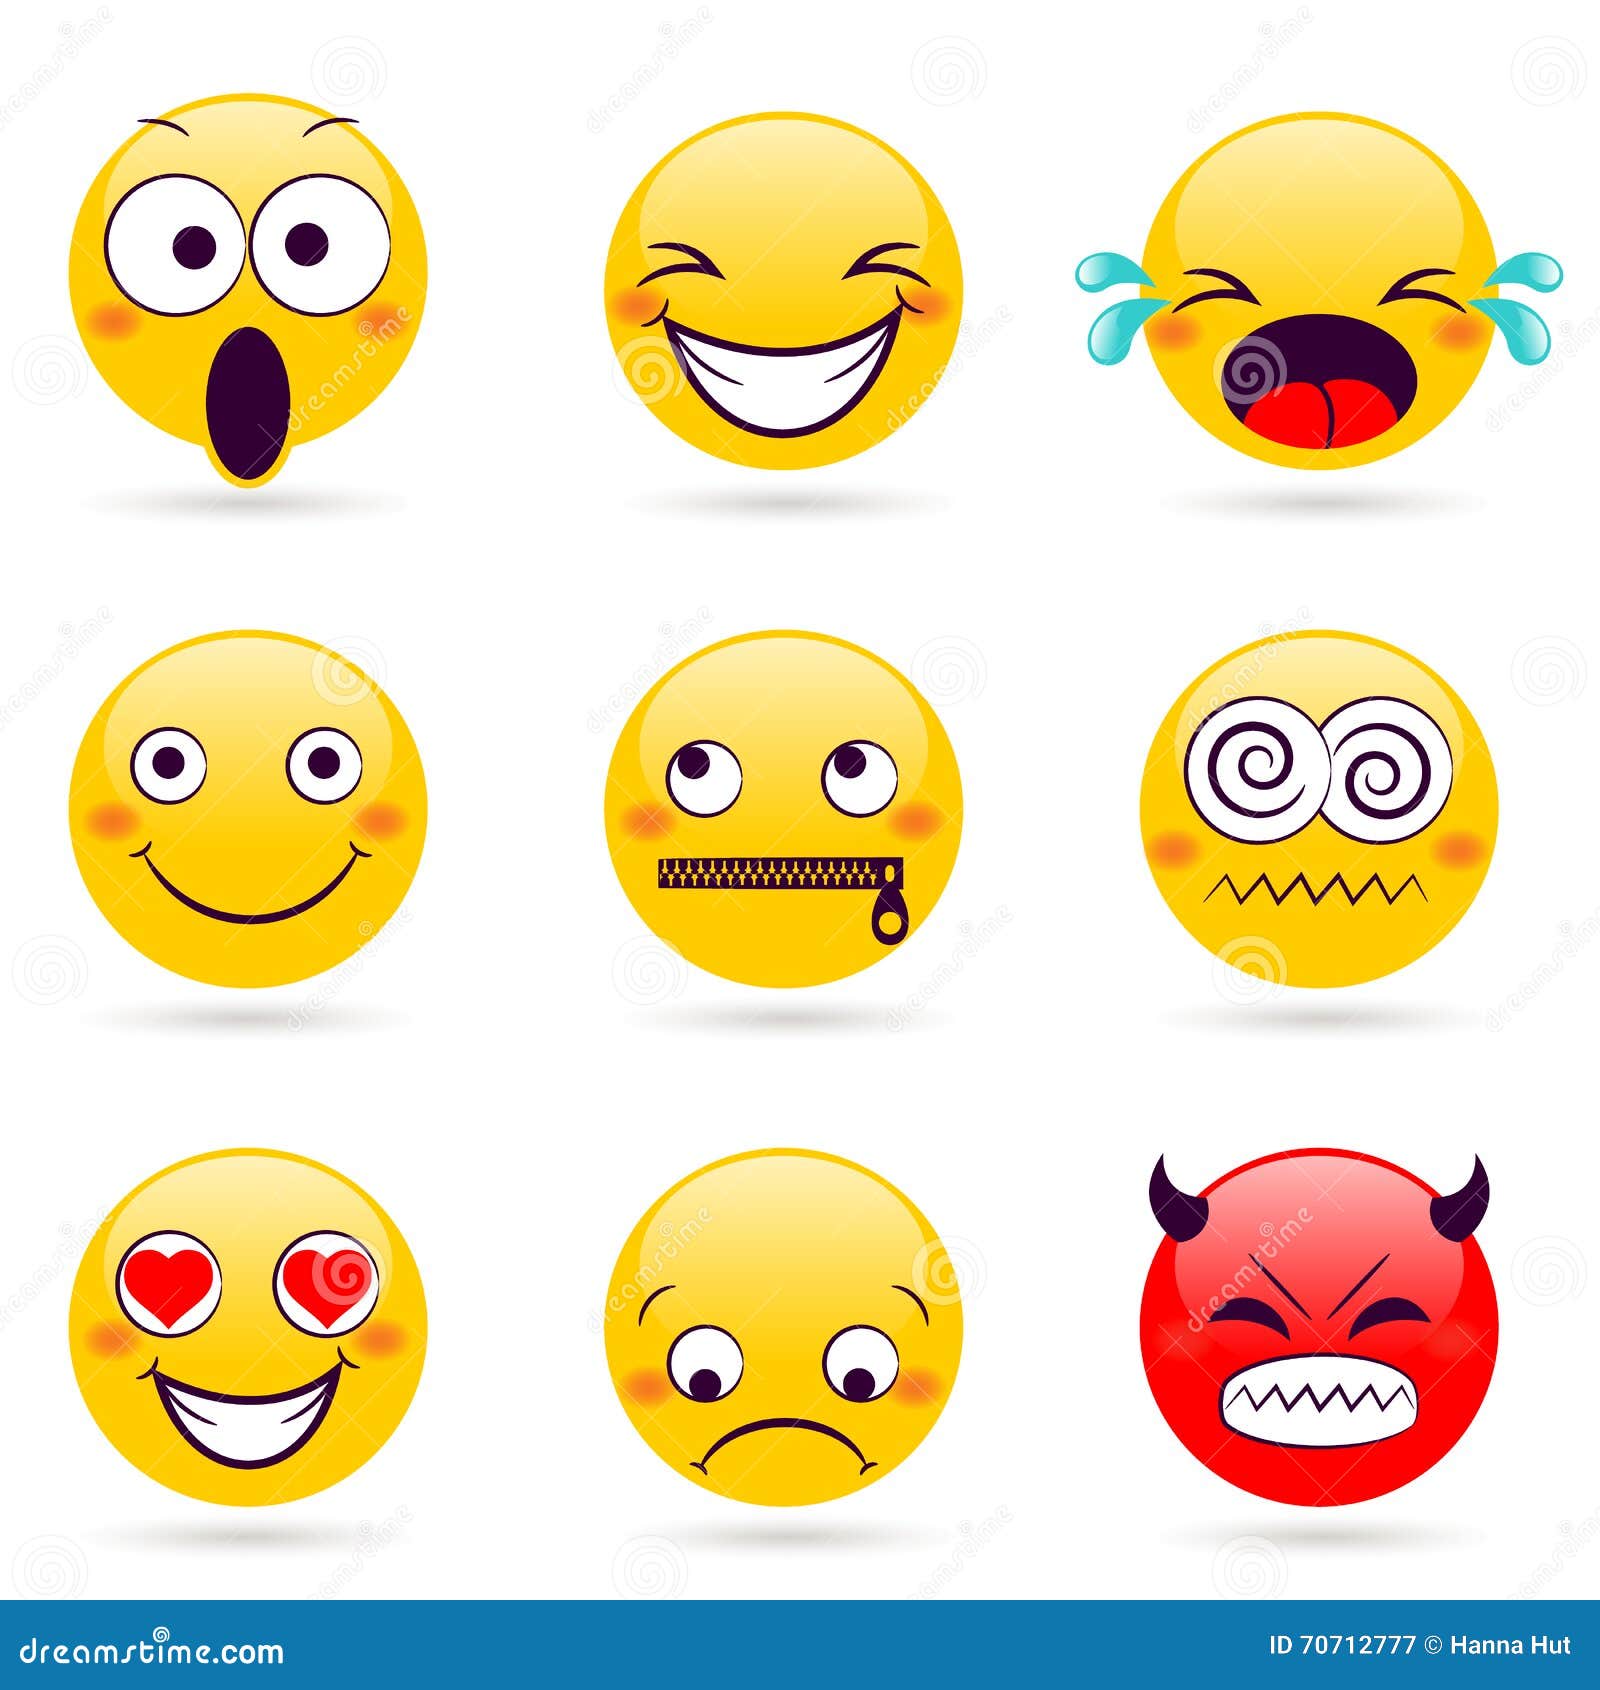 smile icon. smiley faces expressing different feelings